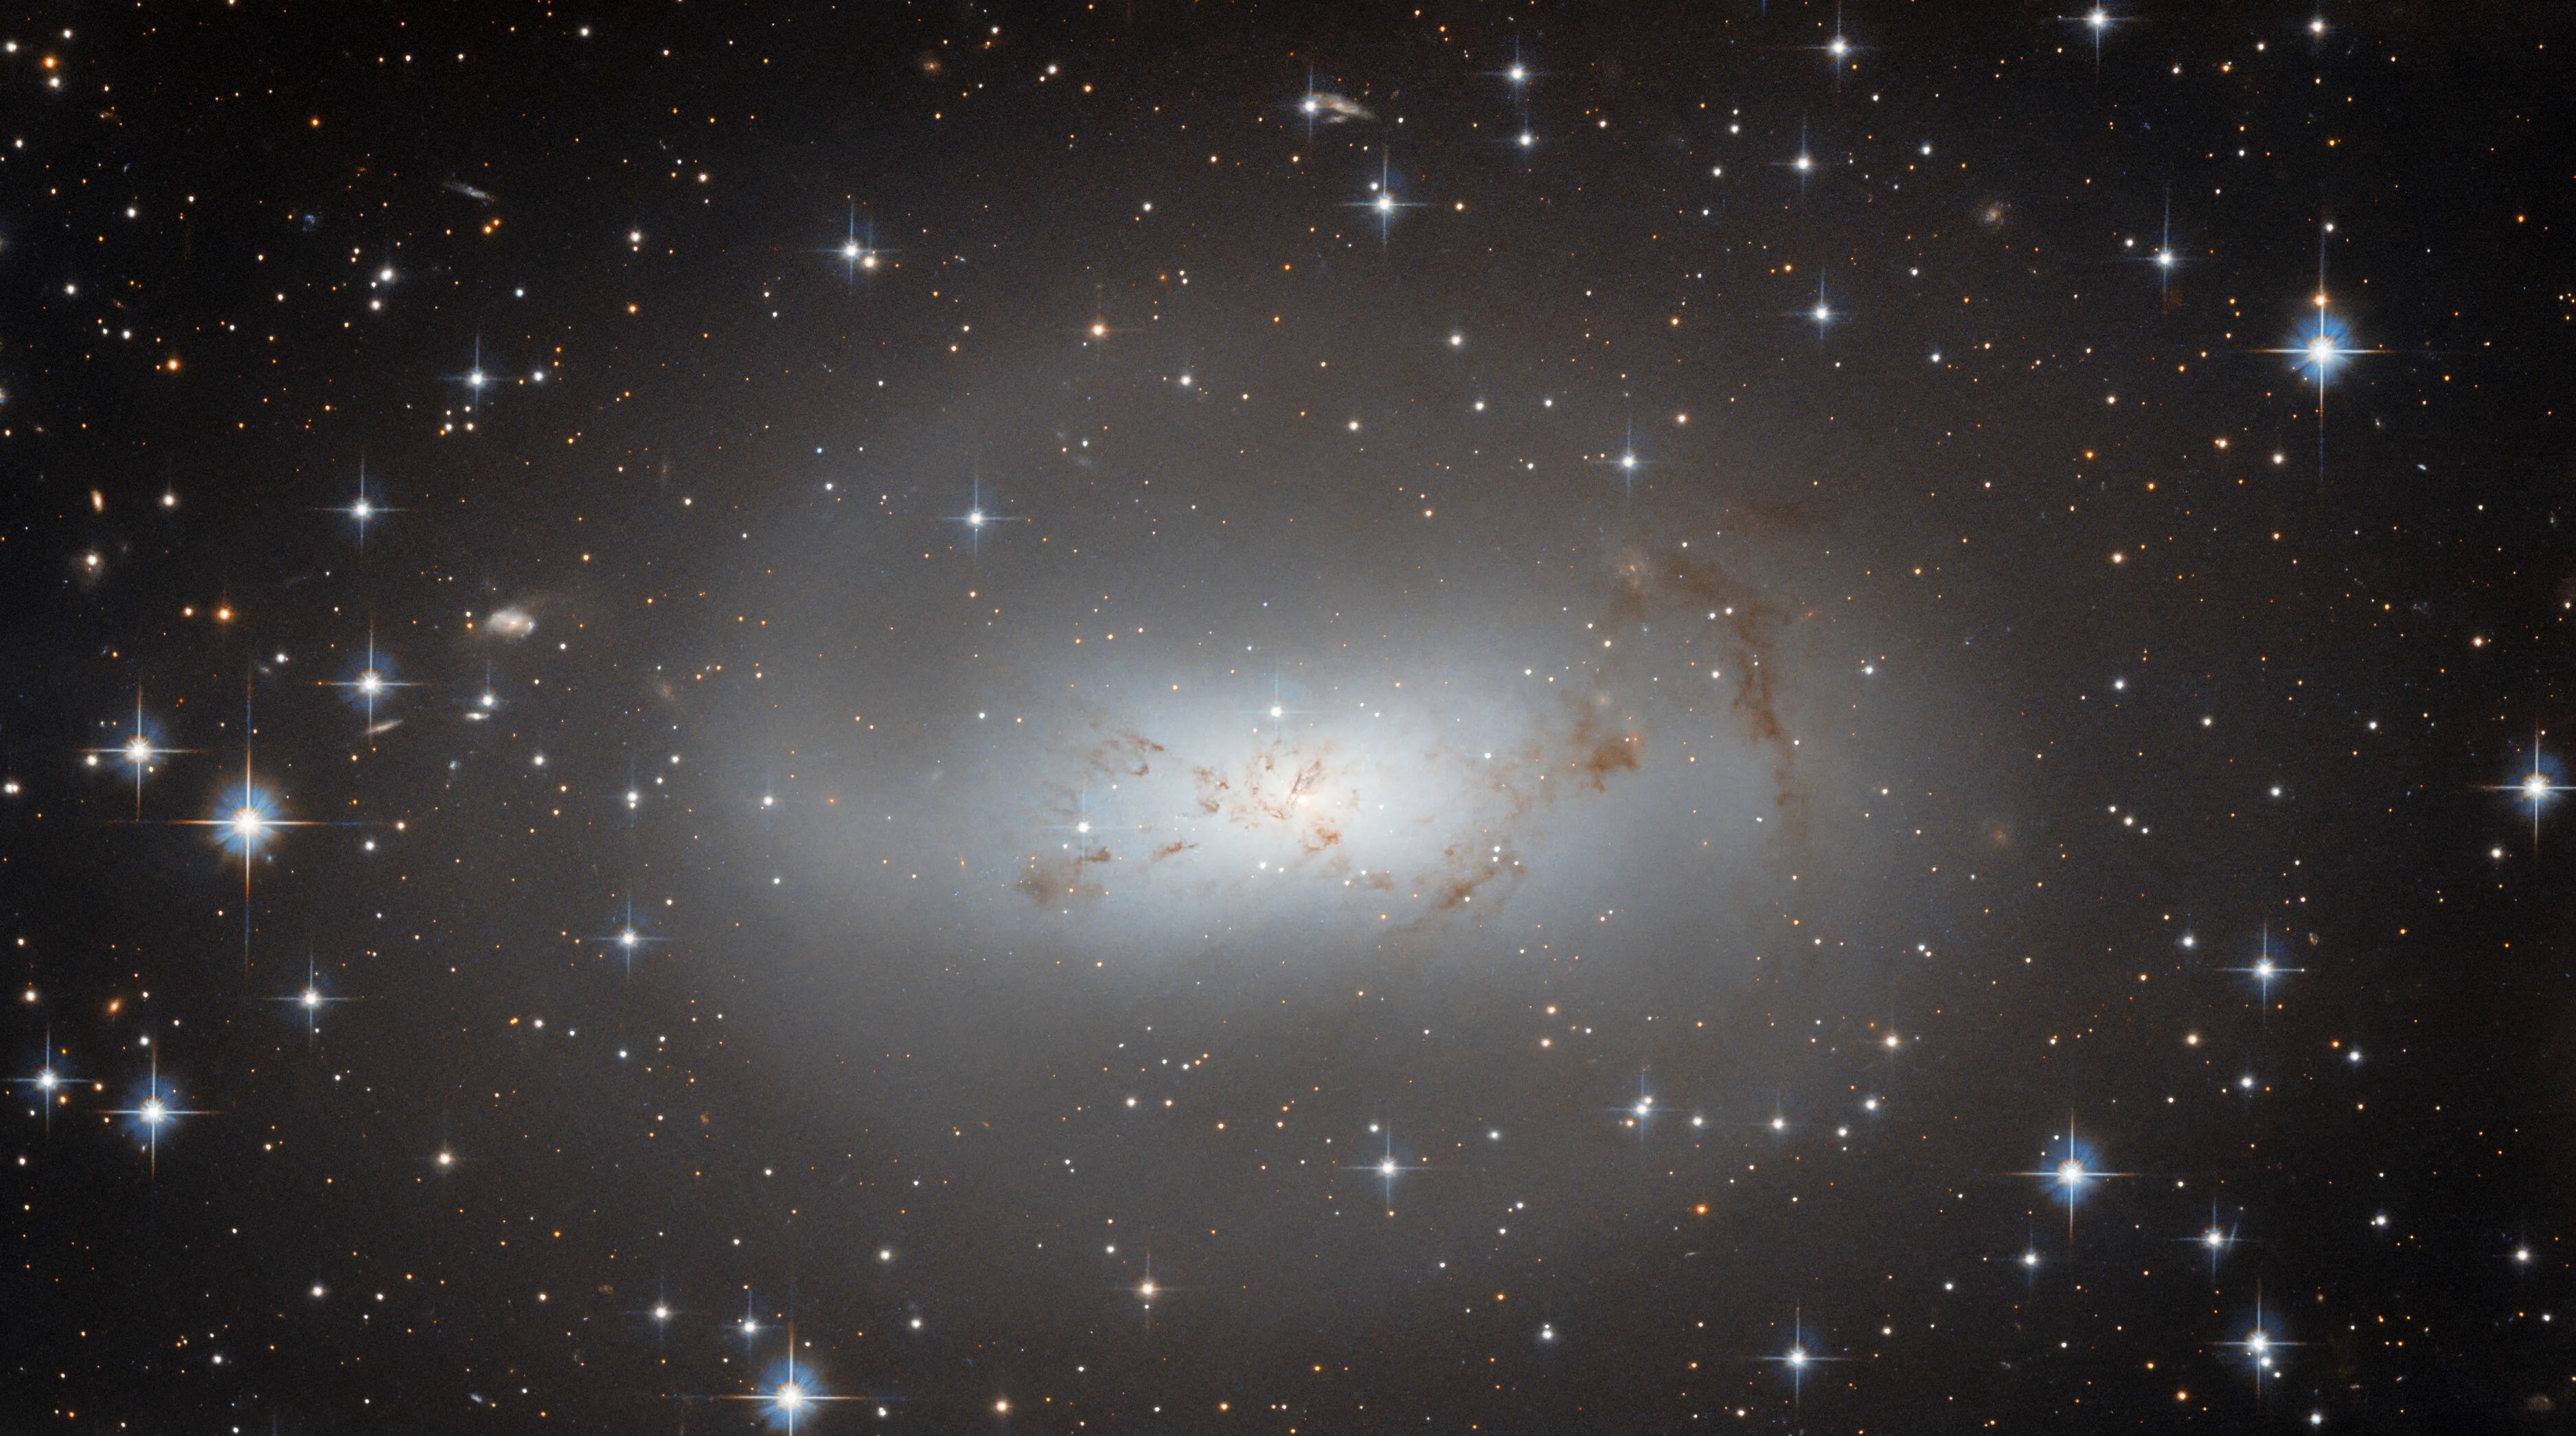 A galaxy, large and occupying most of the view from the center. The whole galaxy is made of smooth, diffuse light. In the center it is brighter and bluer, fading to a pale gray halo that is faint and see-through. The light forms an arm on one side that curls around the top. A couple threads of dark dust cross the center. Many stars shine around the galaxy, on a black background.